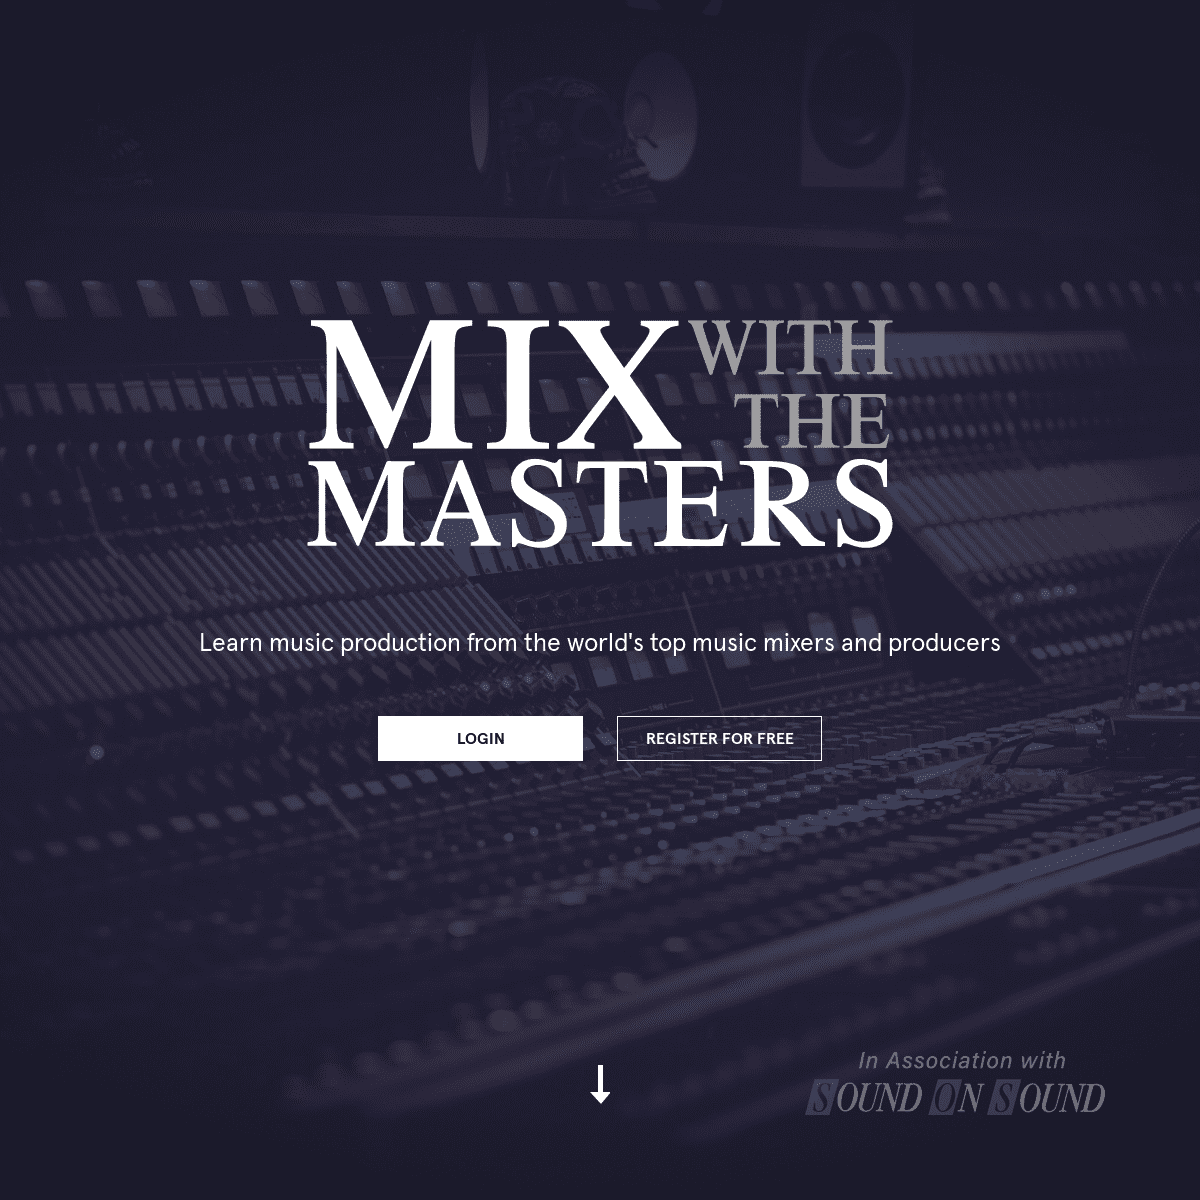 A complete backup of https://mixwiththemasters.com